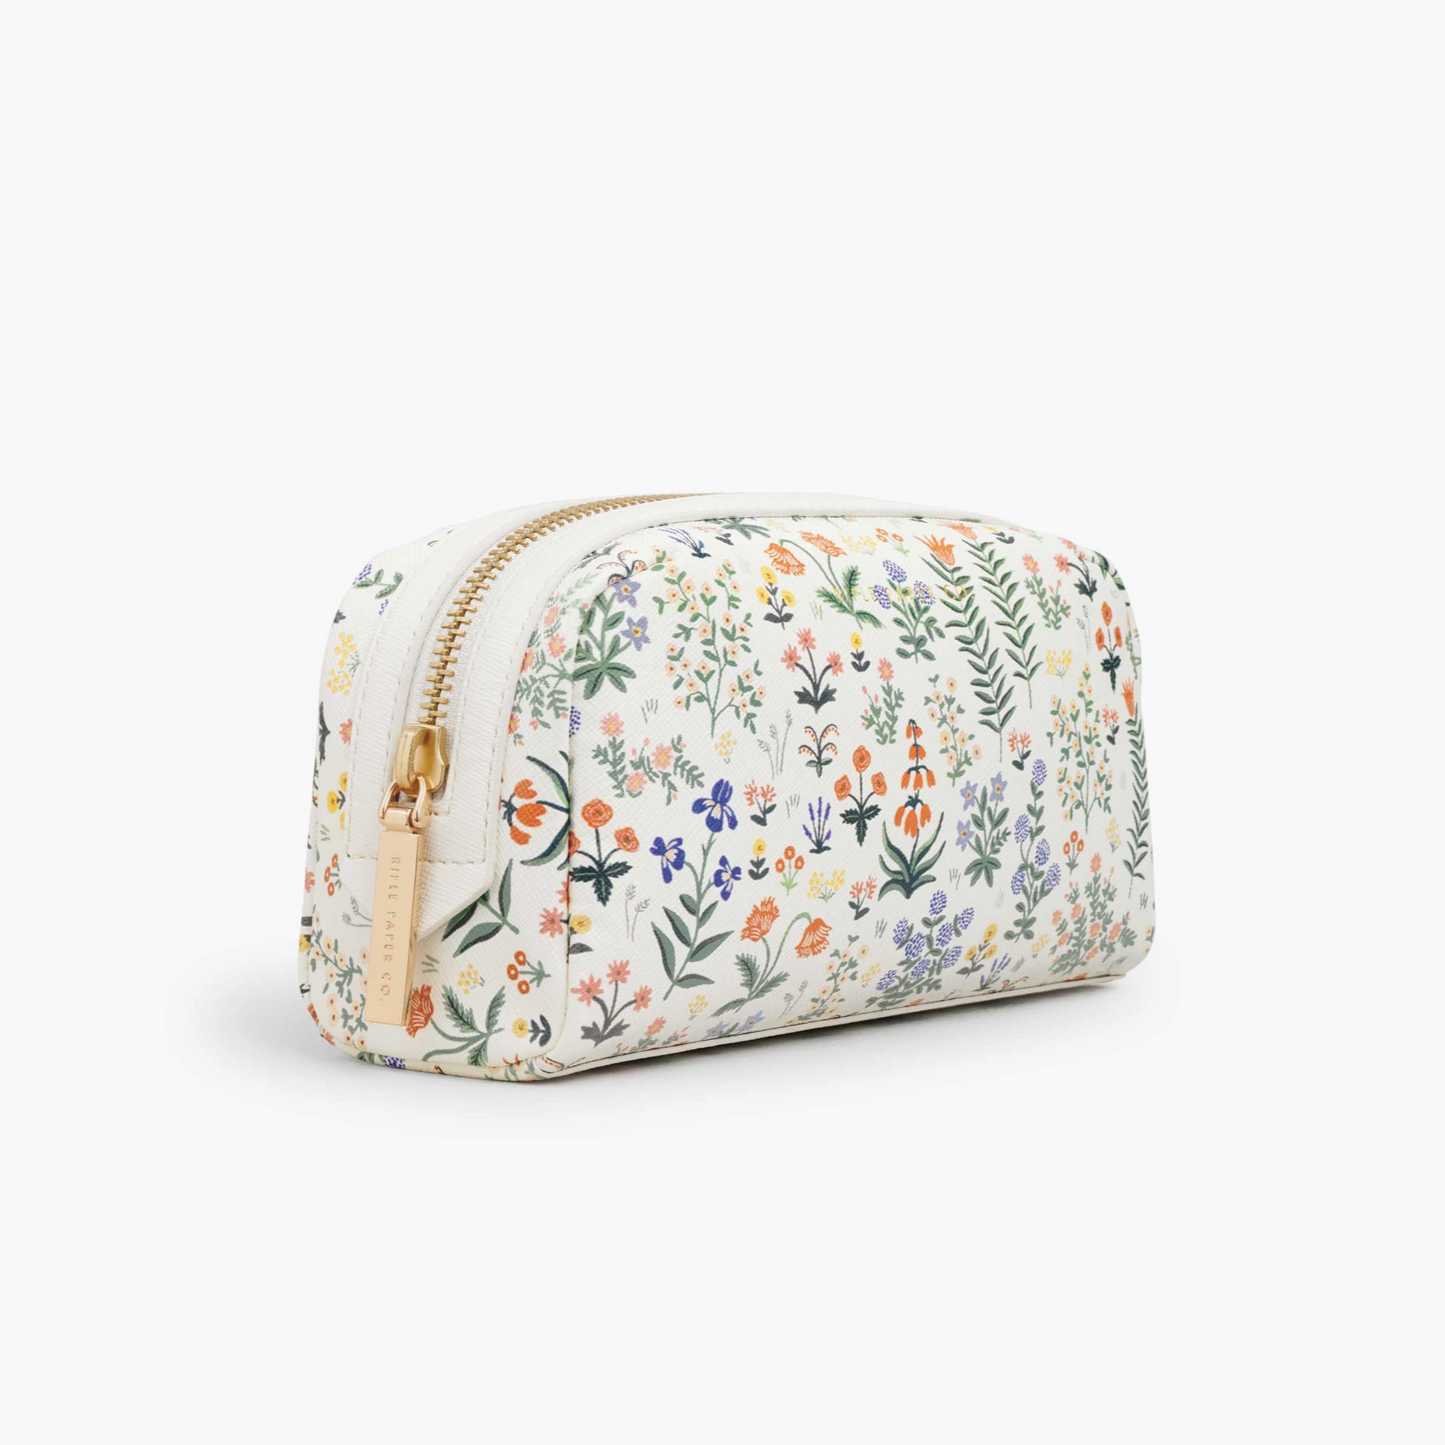 Menagerie Garden Cosmetic Pouch